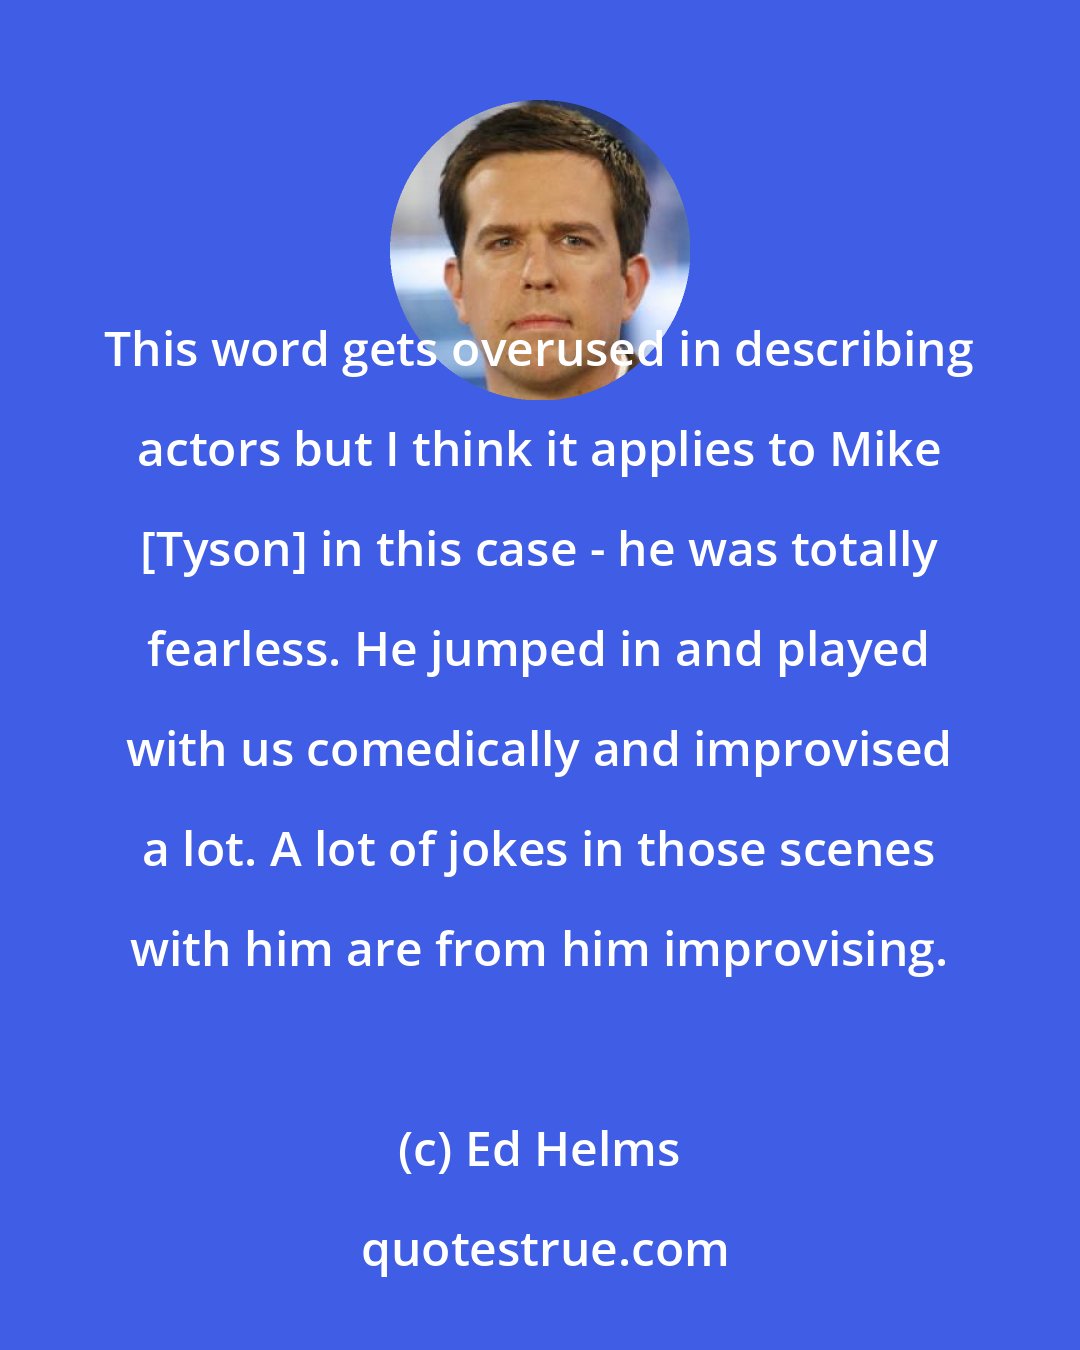 Ed Helms: This word gets overused in describing actors but I think it applies to Mike [Tyson] in this case - he was totally fearless. He jumped in and played with us comedically and improvised a lot. A lot of jokes in those scenes with him are from him improvising.